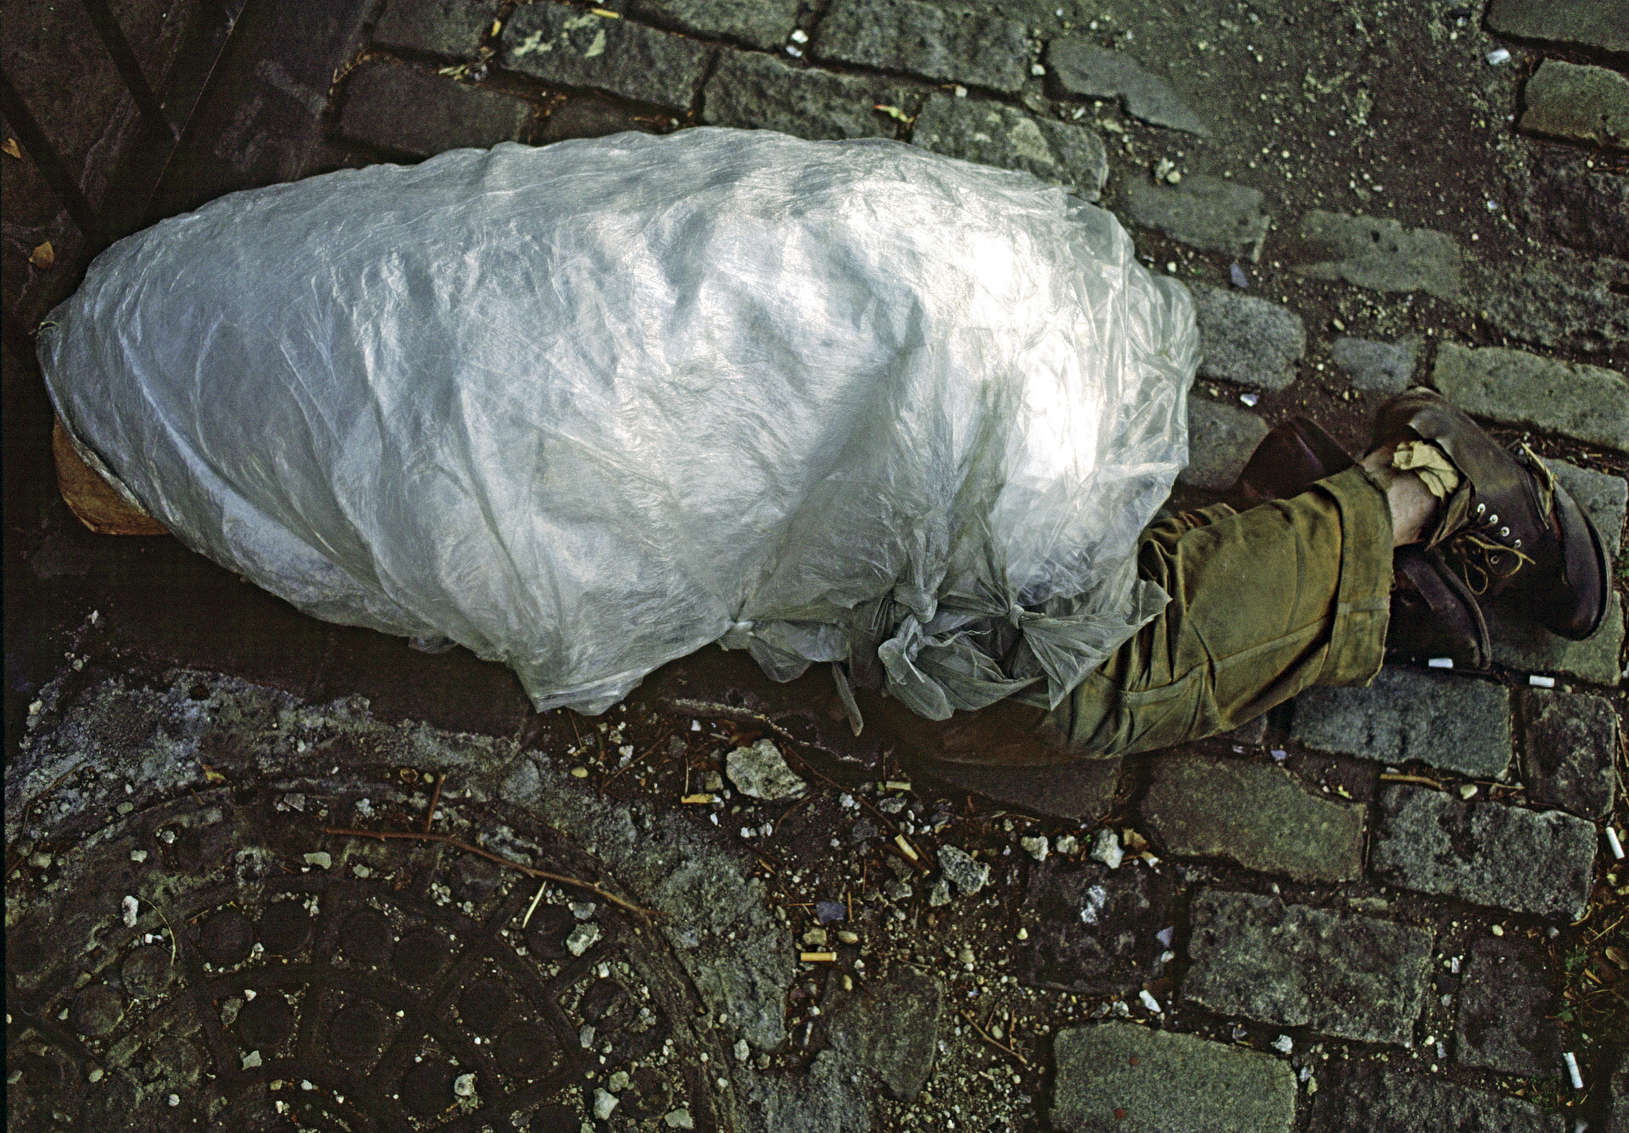 Homeless man wrapped in plastic to keep warm on a minus zero degree temperature day in the winter in New York City.